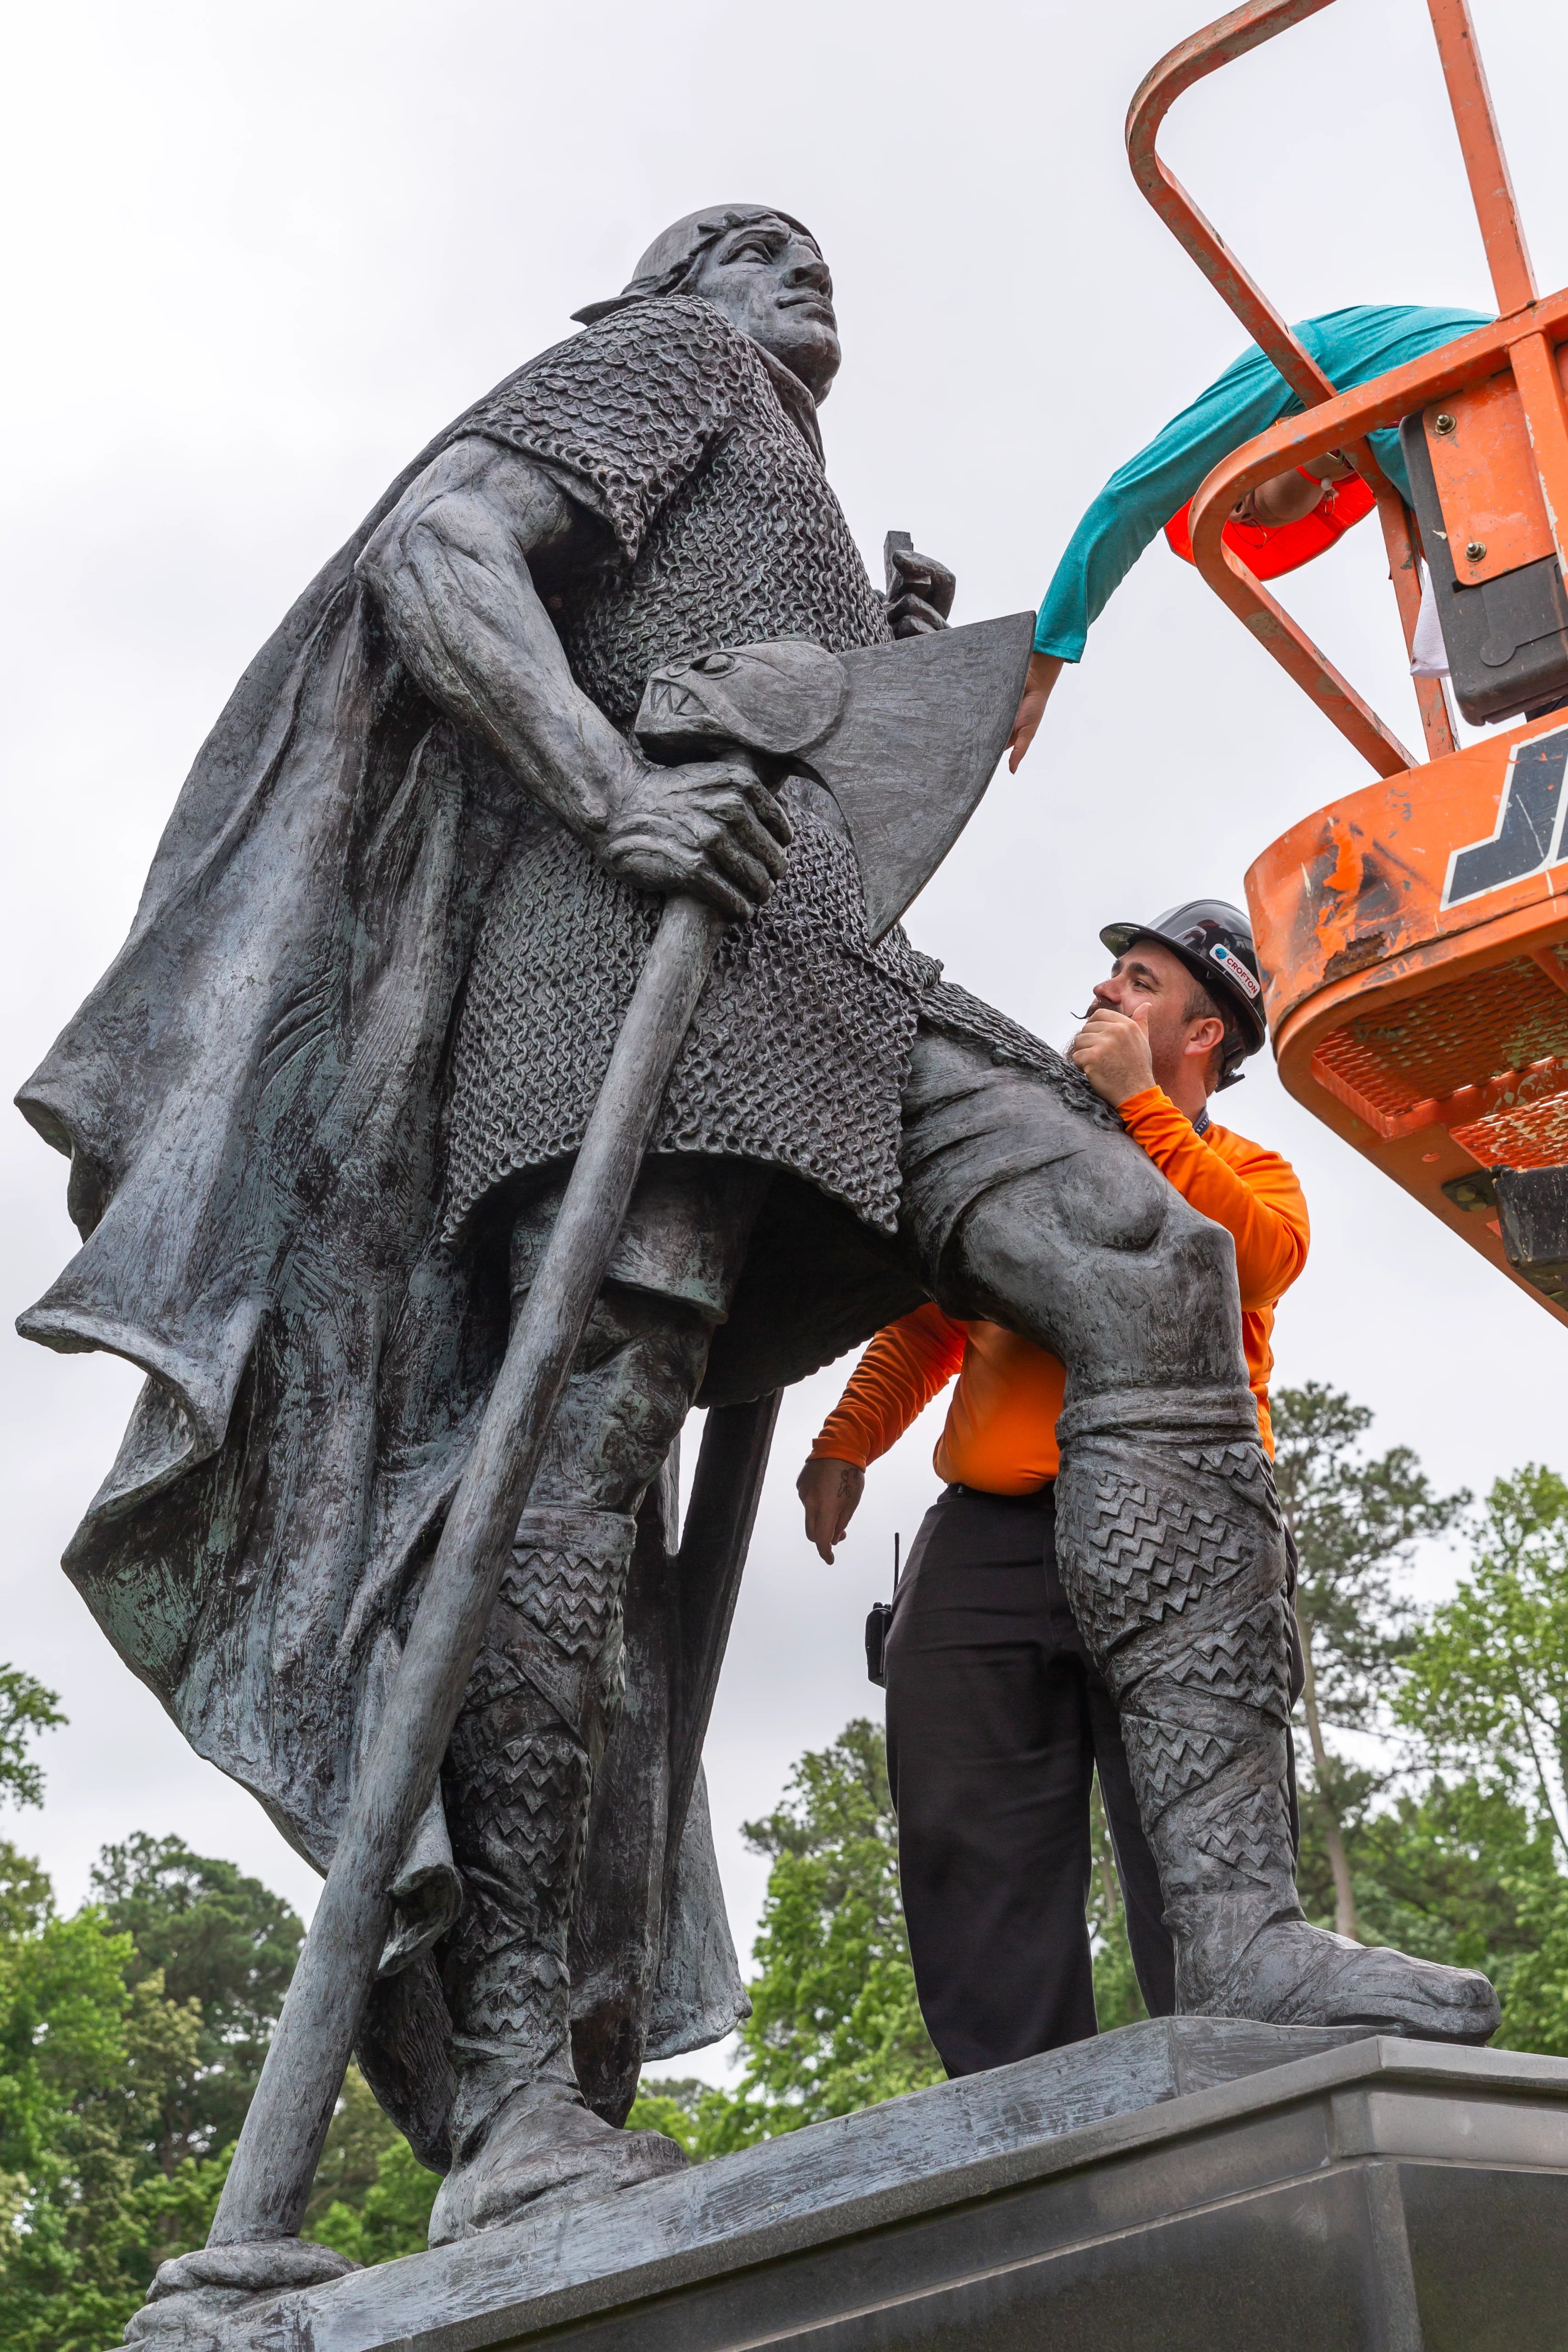 Image of Senior Objects Conservator Erik Farrell on the Leifr sculpture’s base and Conservation intern Marimar Bracero Rodríguez on an orange lift examining and documenting areas of the statue.